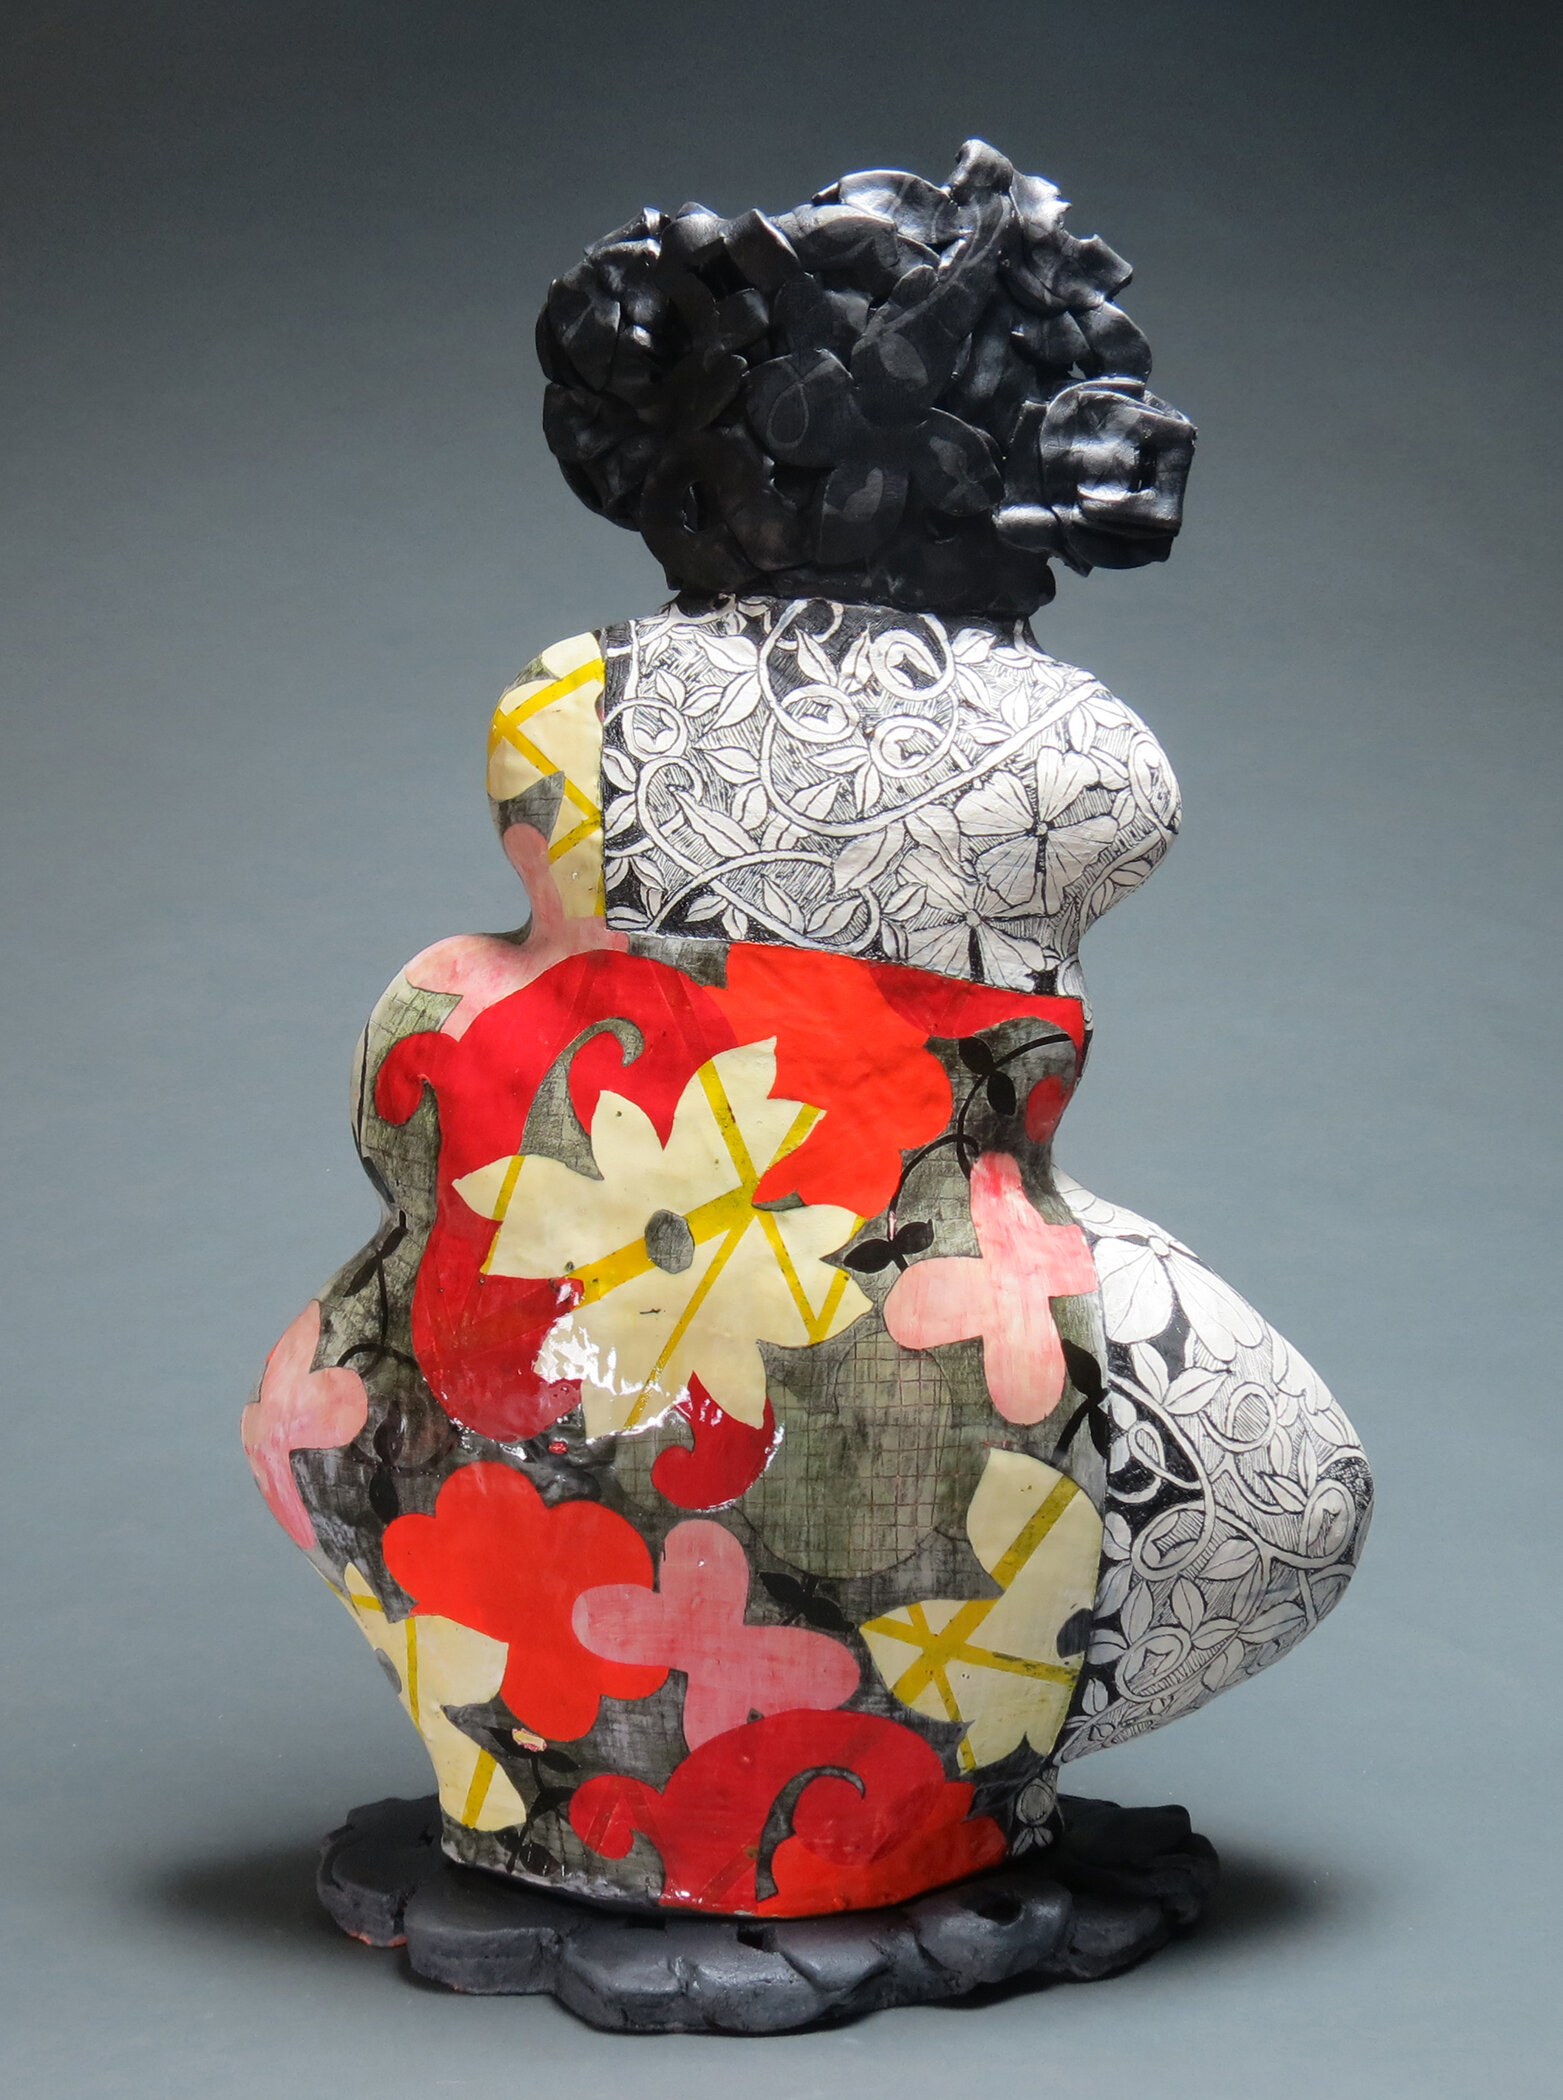 Clay Art Center - Concepts In Clay: Artists of Color